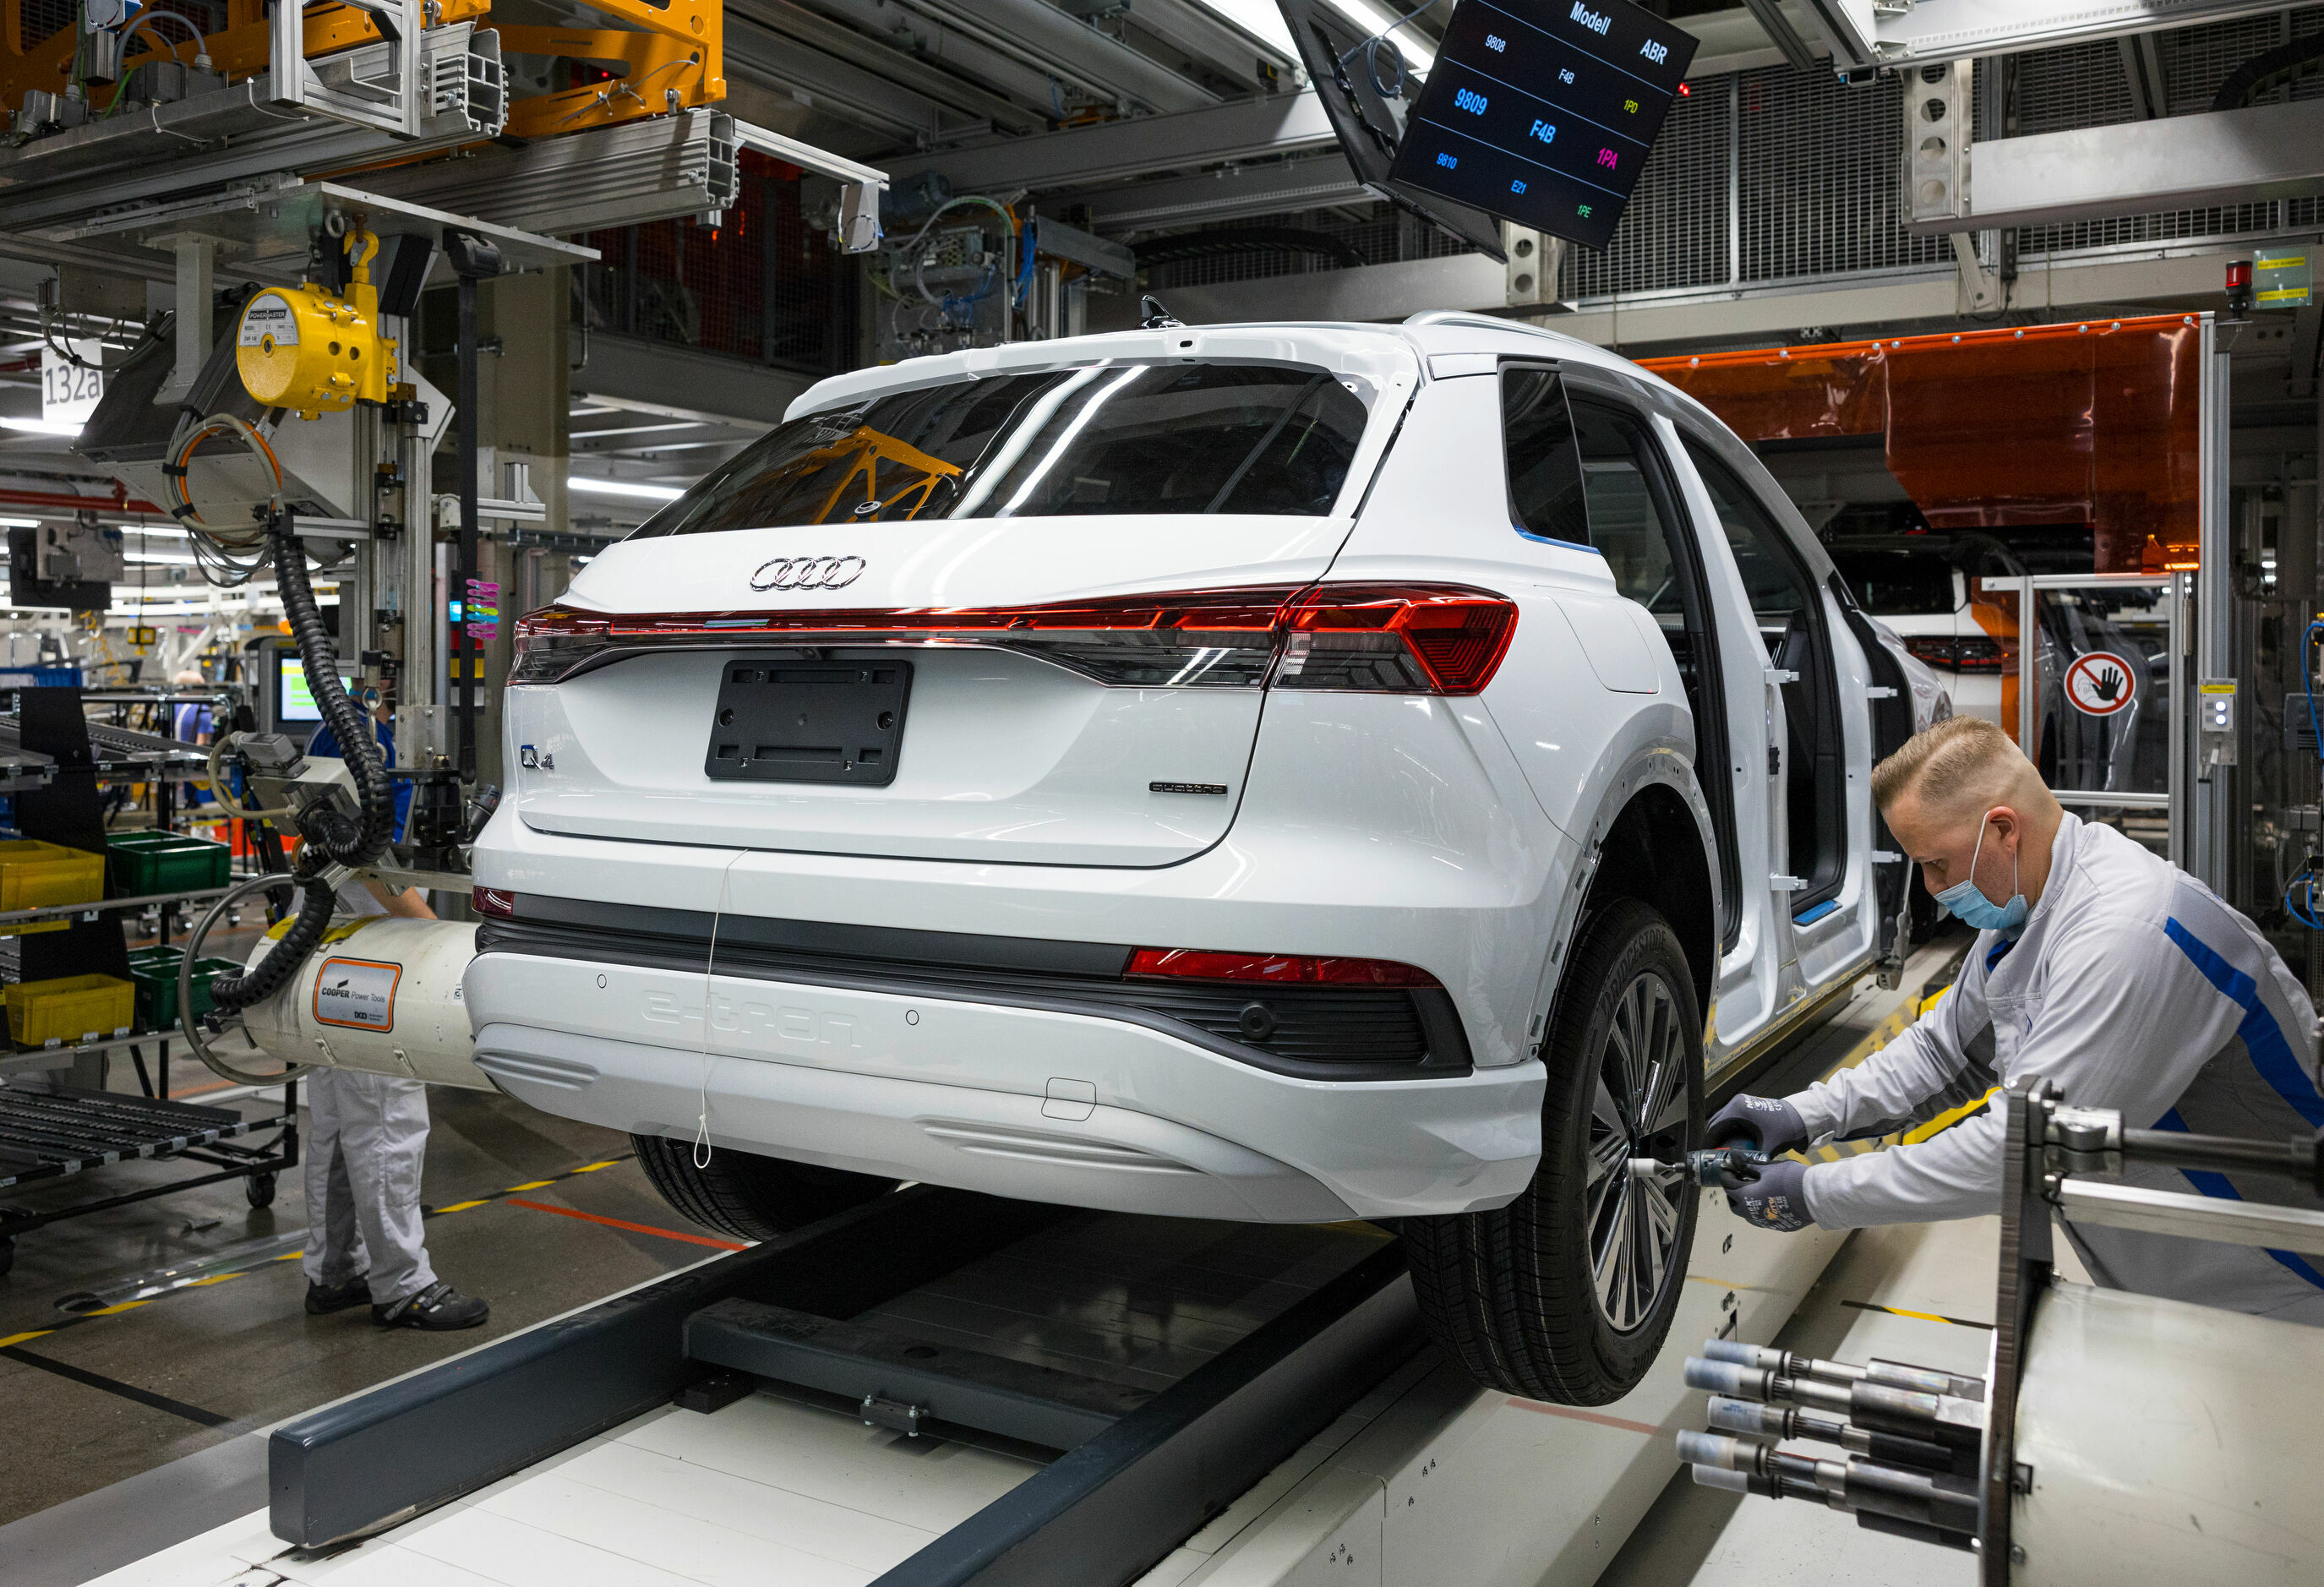 The Audi Q4 e-tron’s success story: in its transition to electromobility, Audi is turning to synergies within the whole group